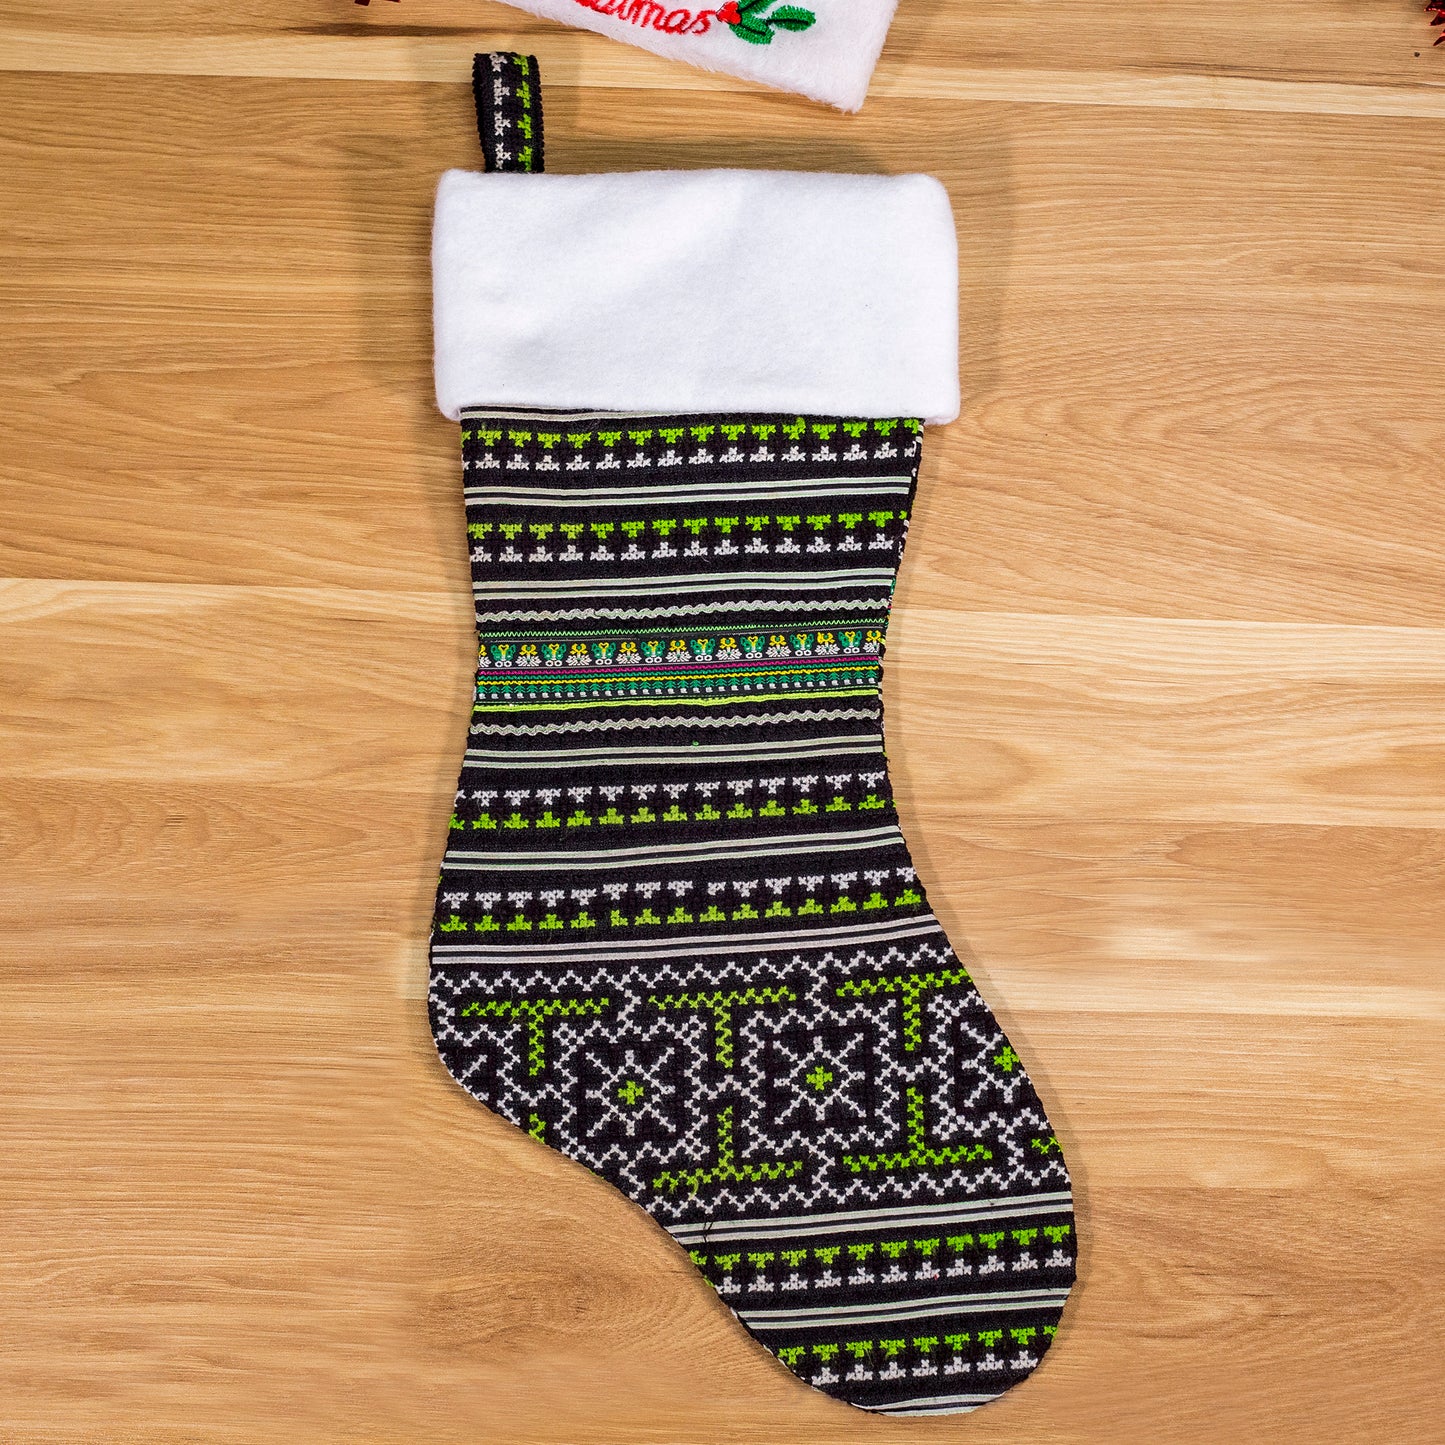 Christmas Stockings - Black and Green embroidery